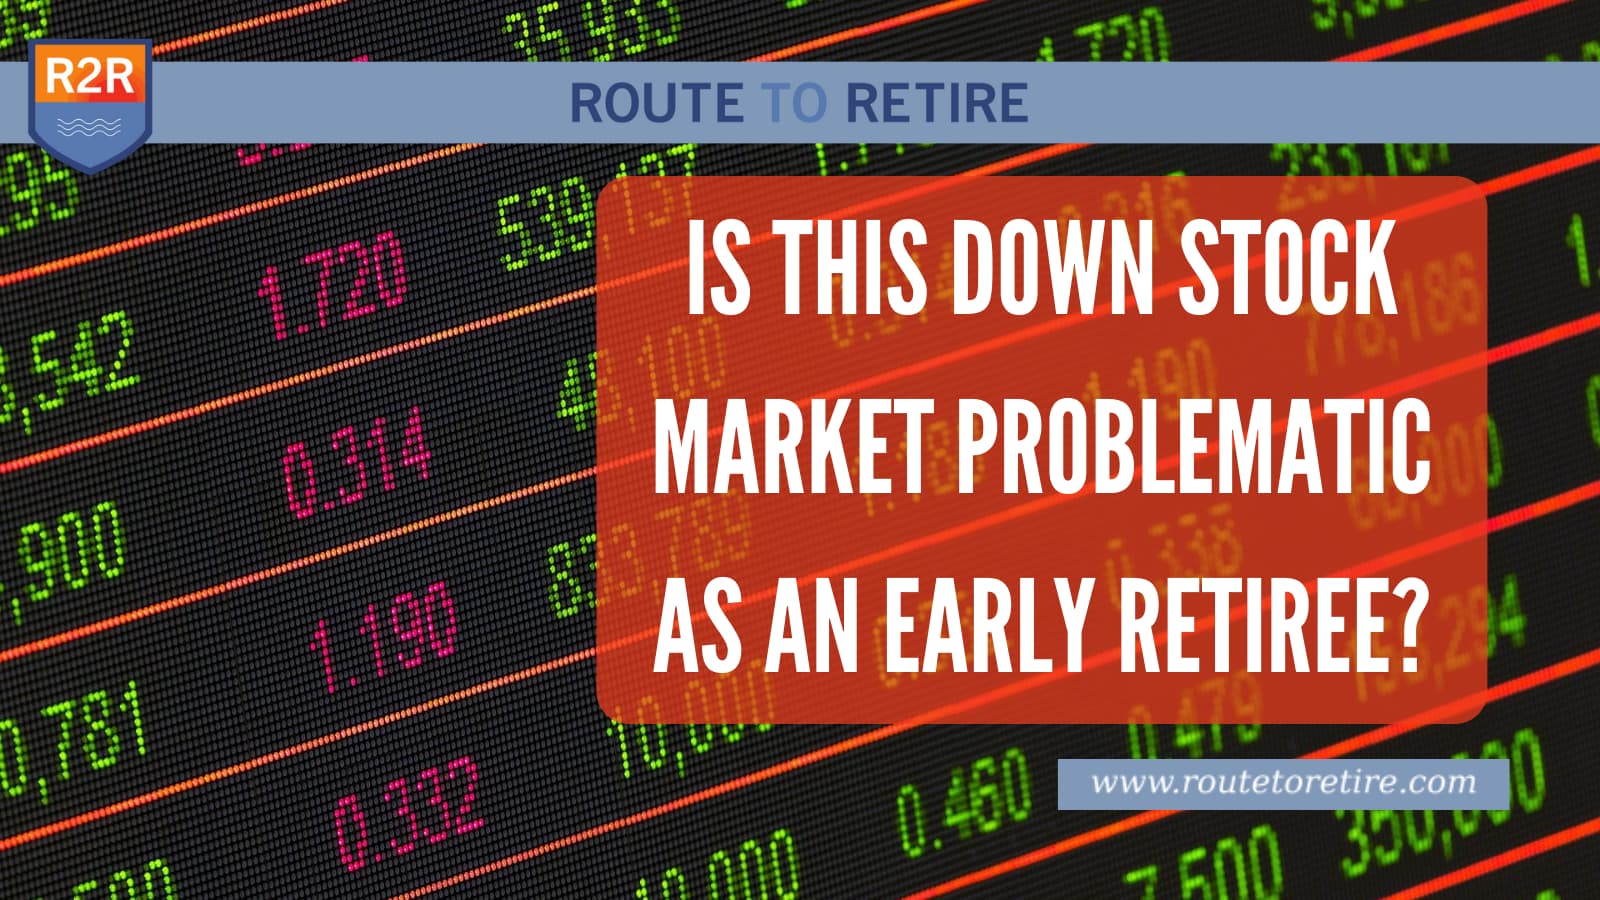 Is This Down Stock Market Problematic as an Early Retiree?